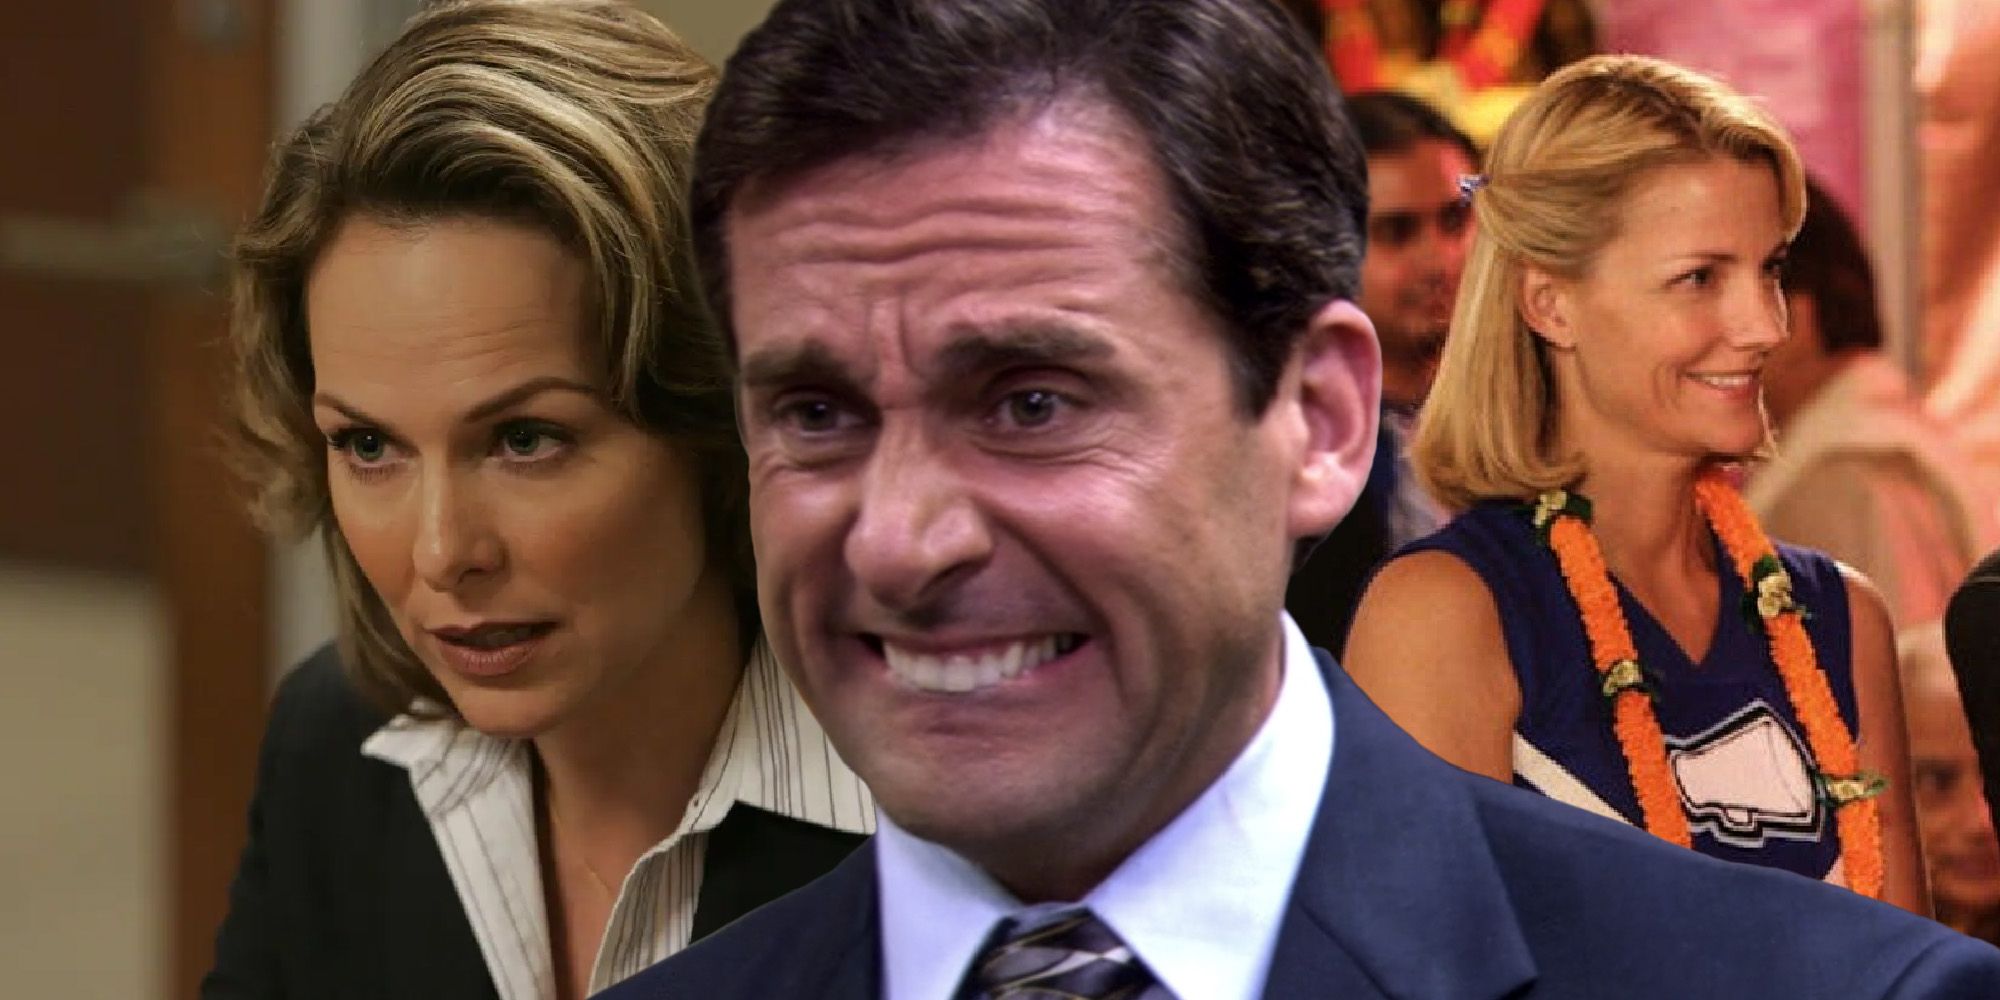 The Office: Every Woman Michael Scott Dated Before Ending Up With Holly